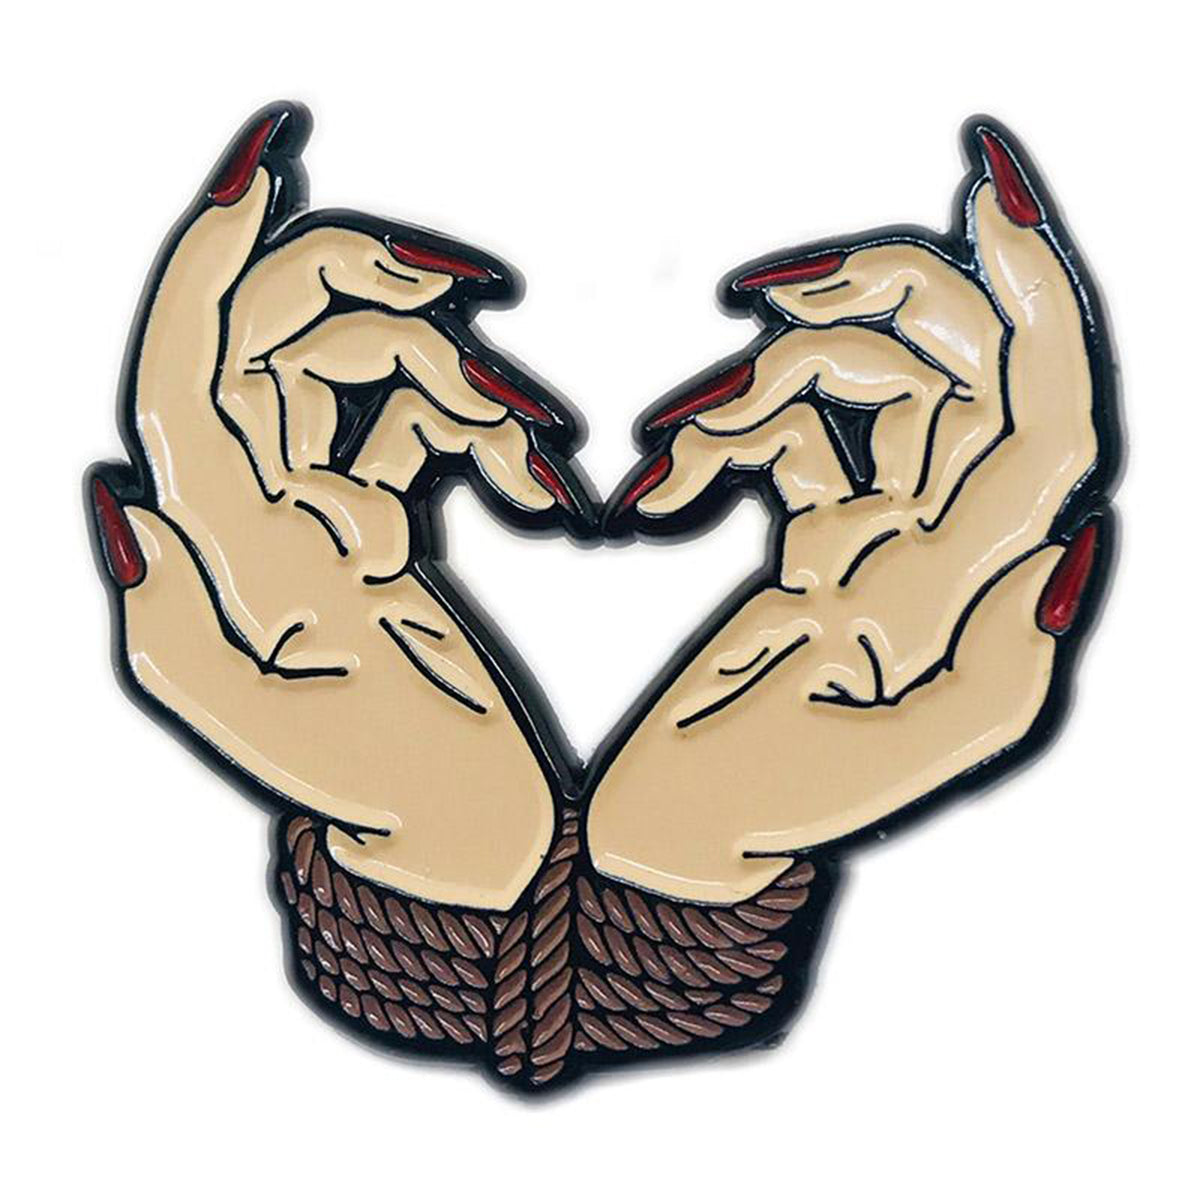 Geeky & Kinky Bound By Love Hands Pin